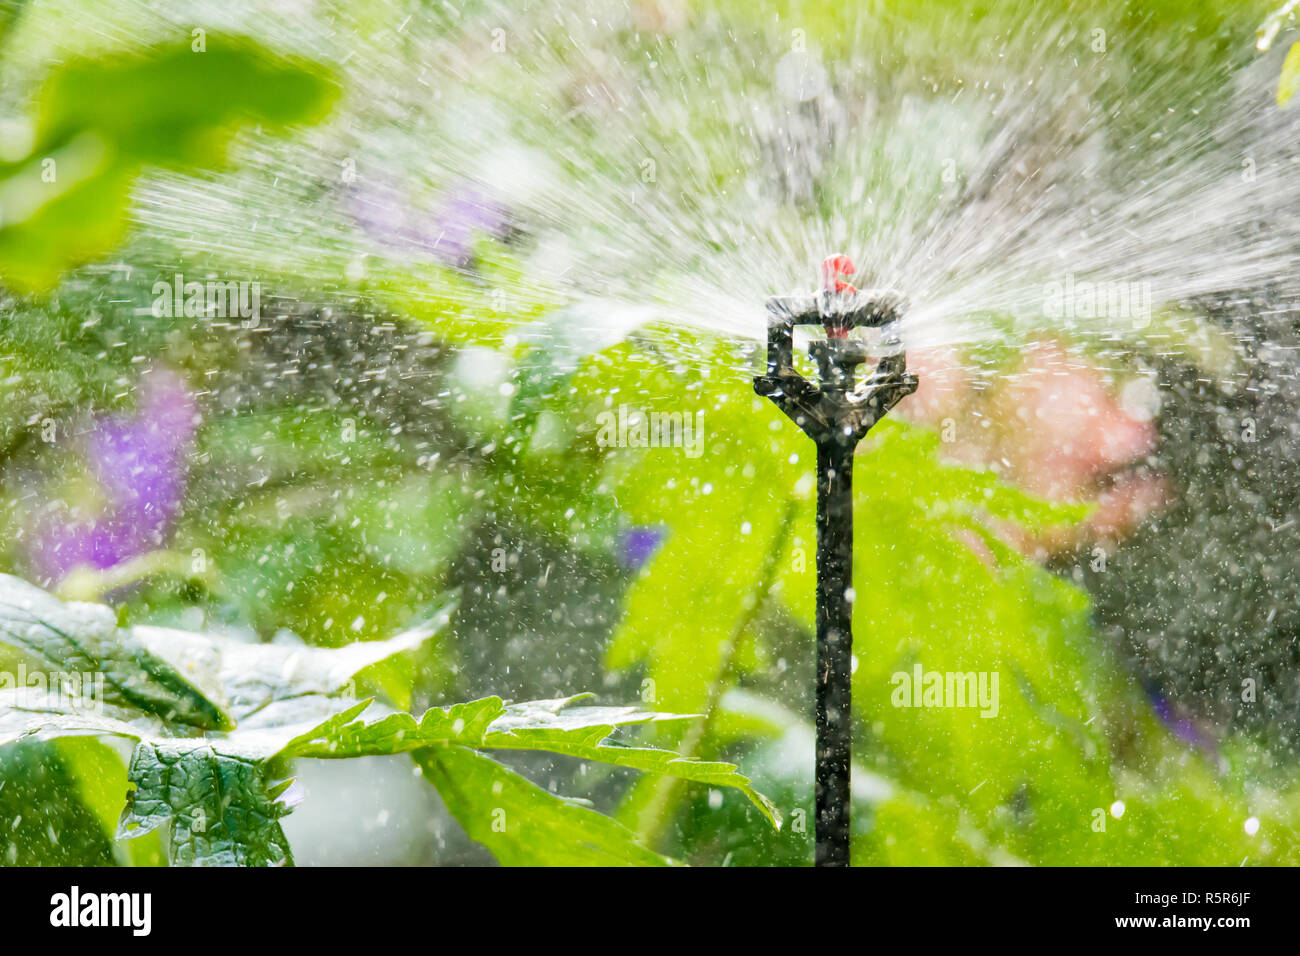 Garden Irrigation With An Automatic Watering System Stock Photo